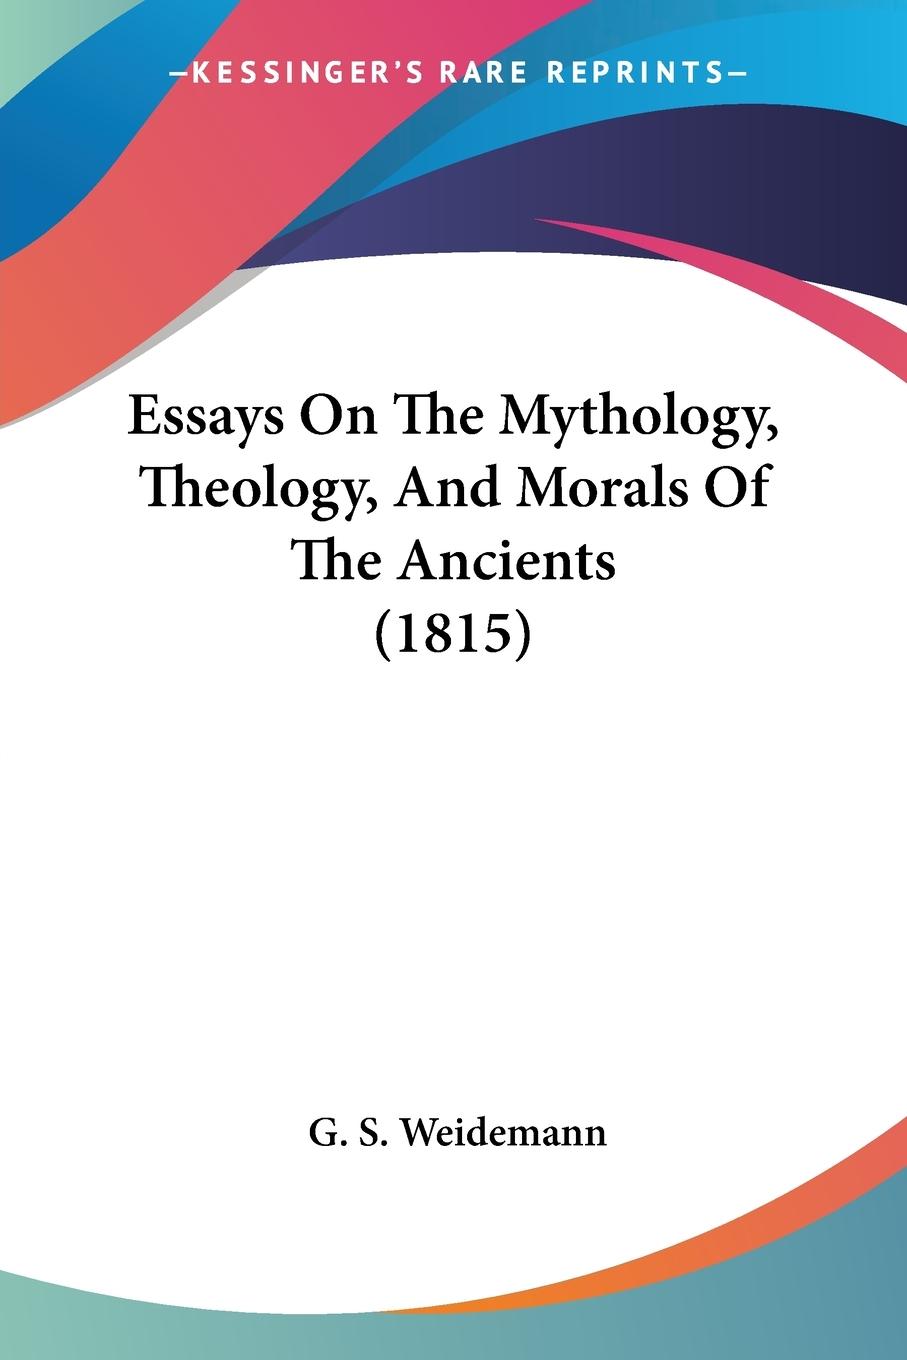 Essays On The Mythology, Theology, And Morals Of The Ancients (1815) - Weidemann, G. S.